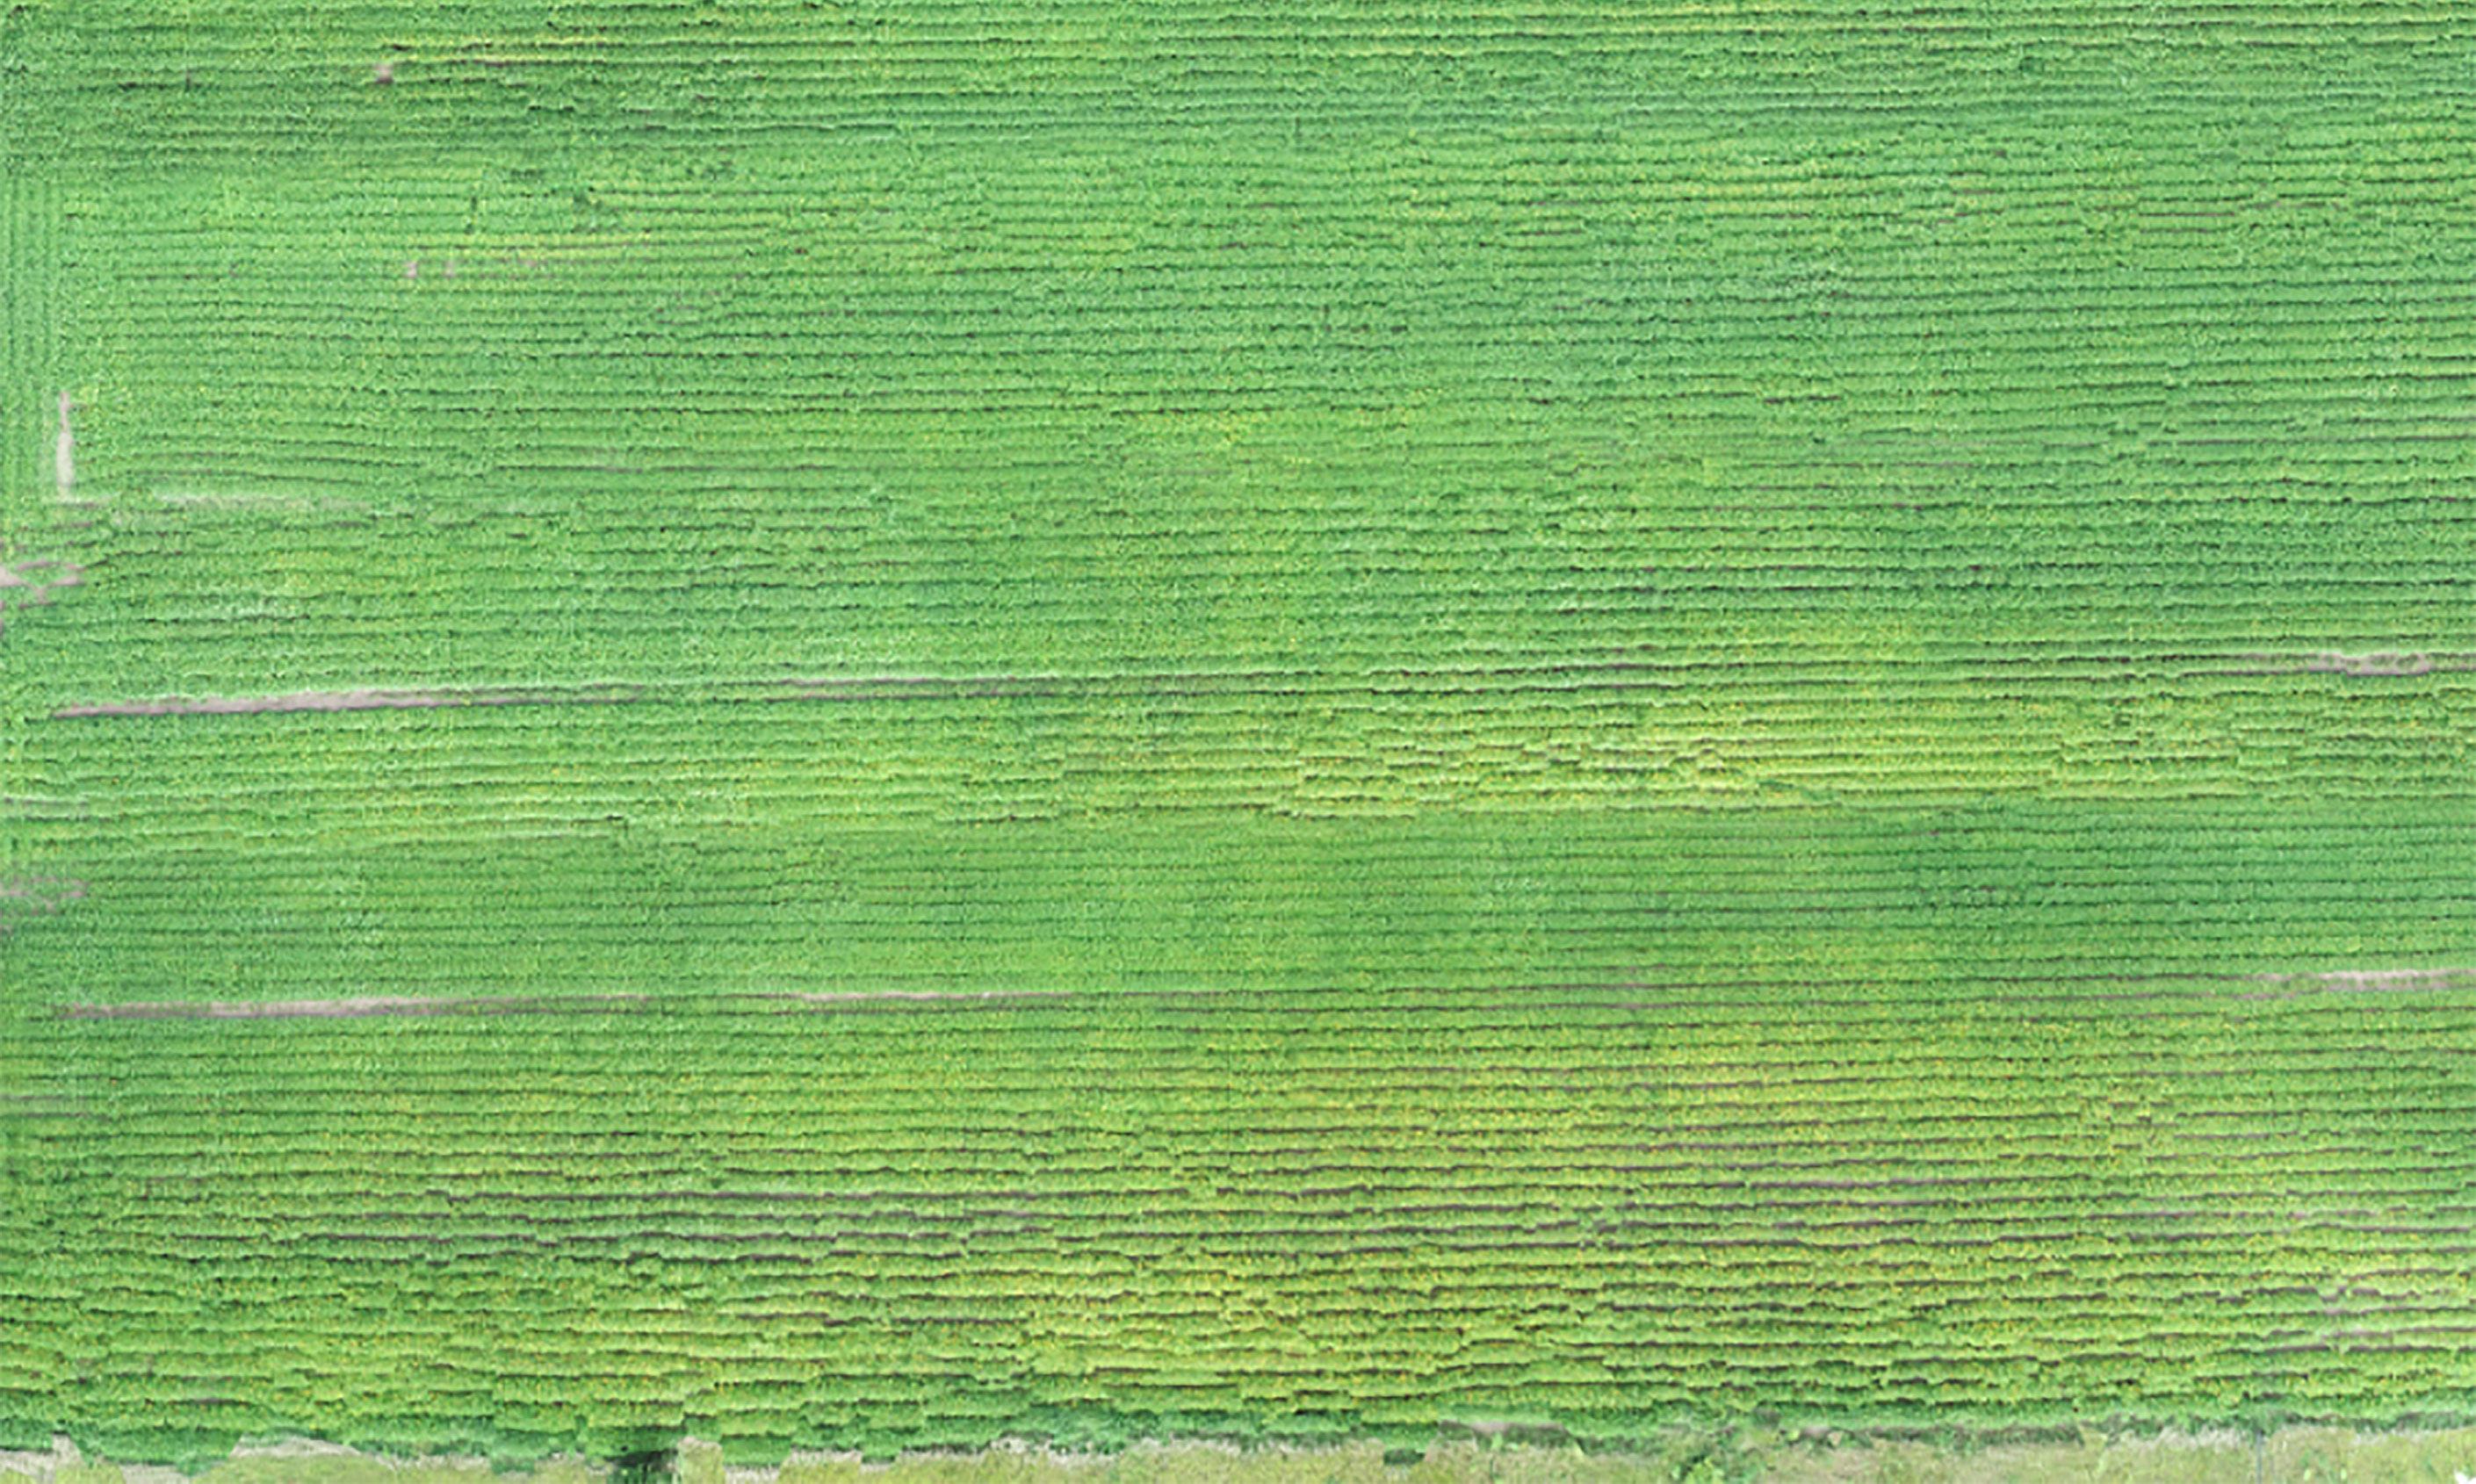 An aerial view of a soybean field with noticable rows of yellowing plants due to SCN infection.